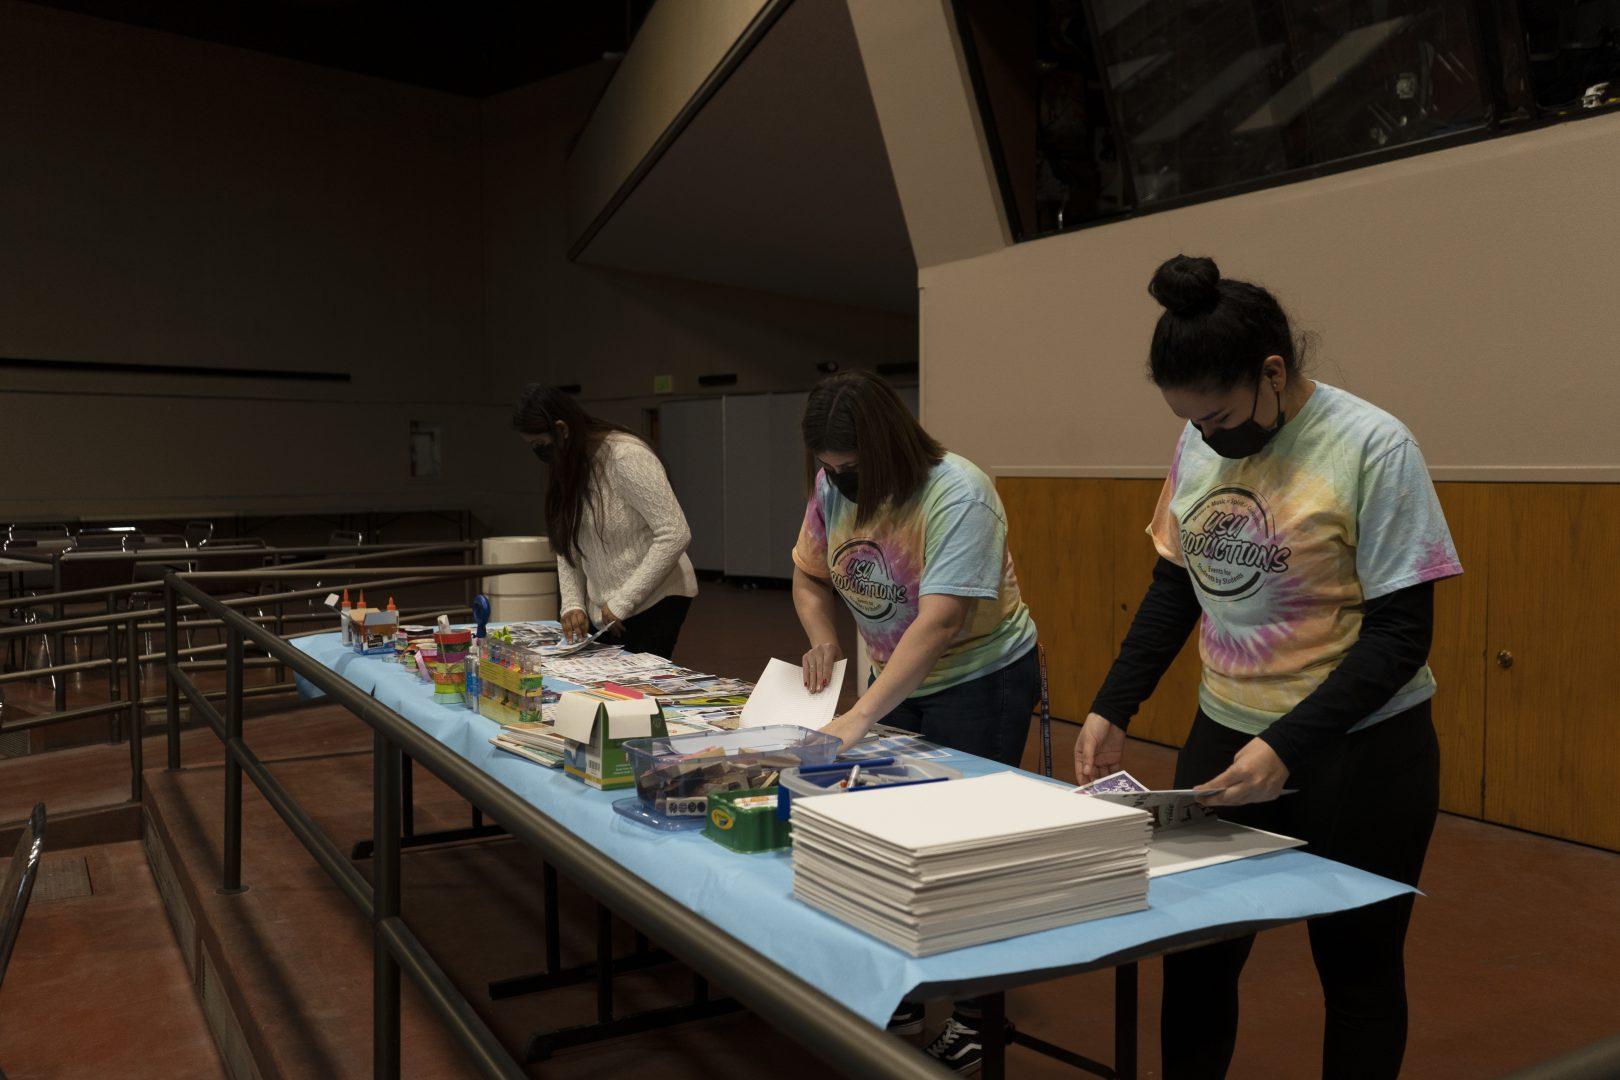 Organizers set up for the Create Your Own Vision Board event. (Wyatt Bible/The Collegian)